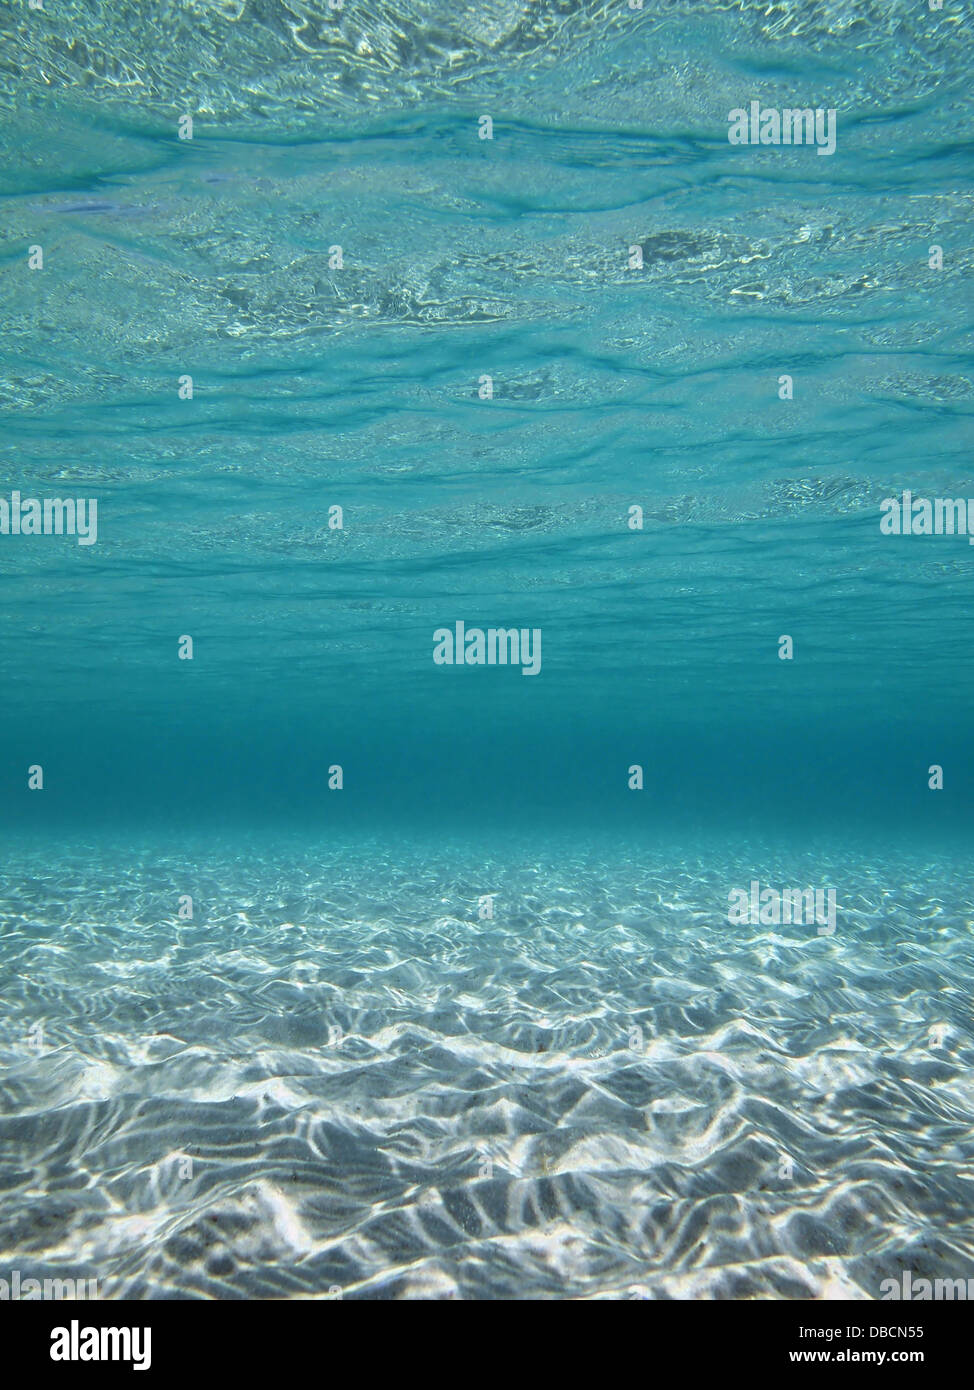 Underwater sandy seafloor in clear shallow water, Caribbean sea, natural scene Stock Photo